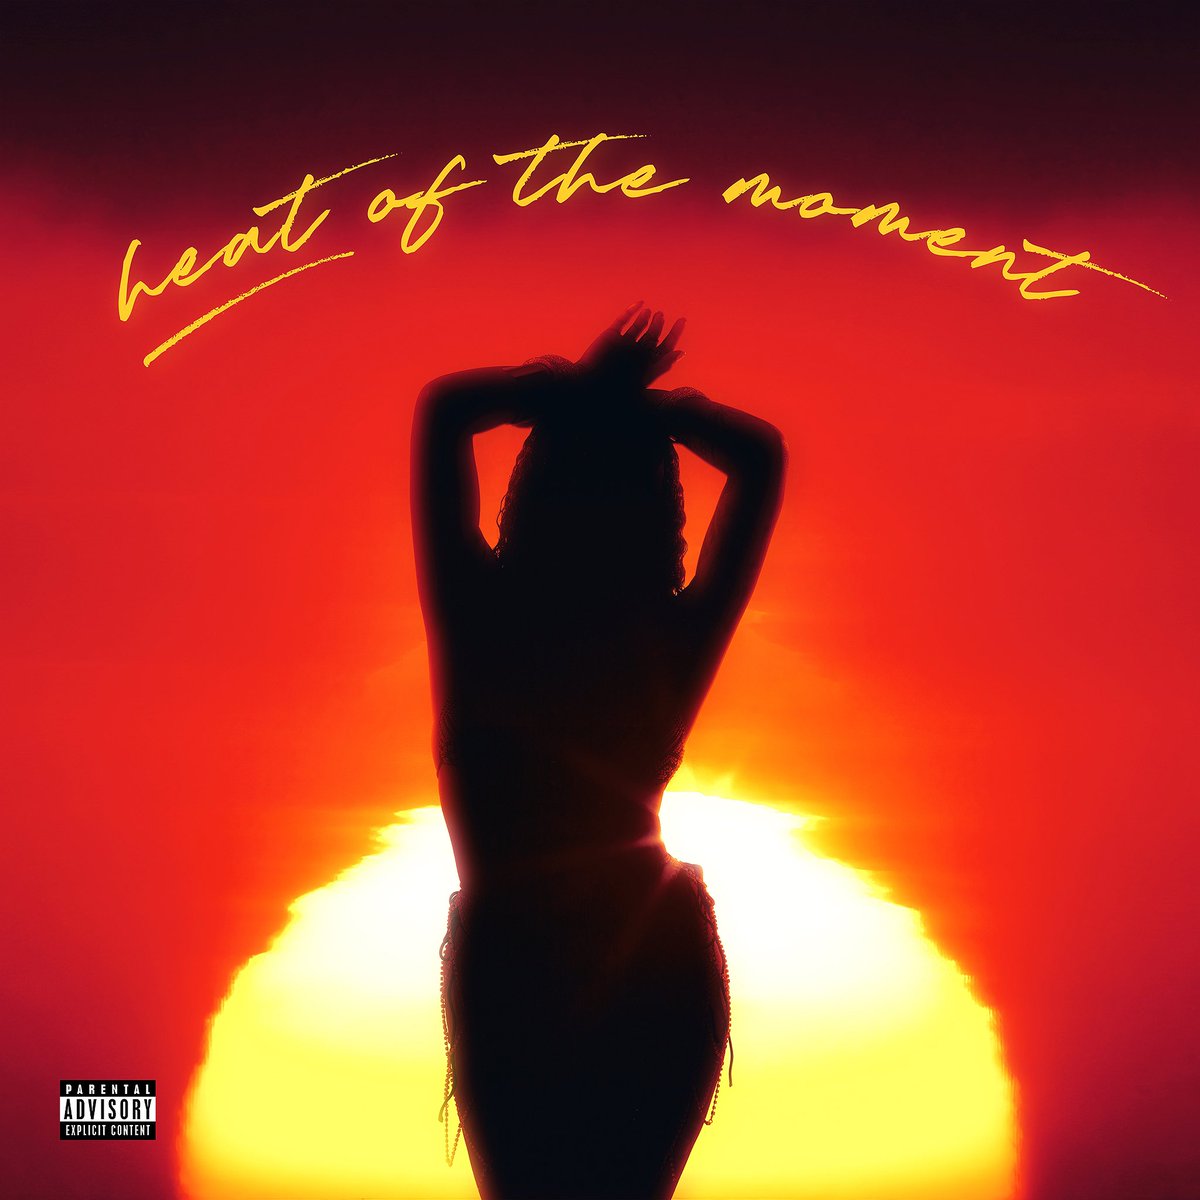 My new album “Heat of the Moment” is OUT NOW 🔥🔥🔥💿 #HOTM
Listen here: music.empi.re/heatofthemoment